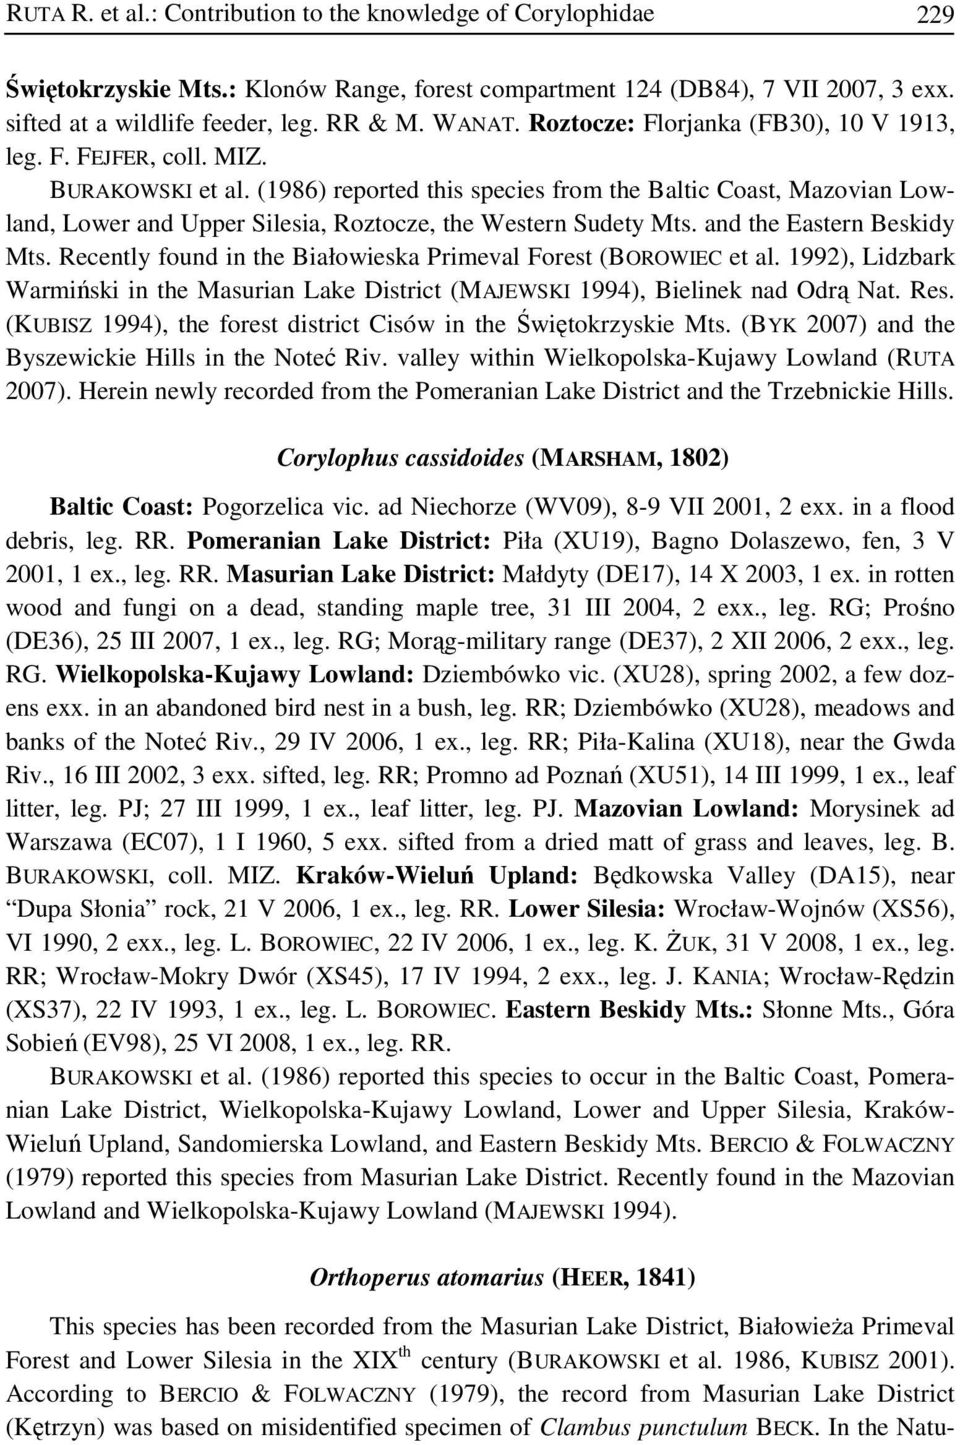 (1986) reported this species from the Baltic Coast, Mazovian Lowland, Lower and Upper Silesia, Roztocze, the Western Sudety Mts. and the Eastern Beskidy Mts.